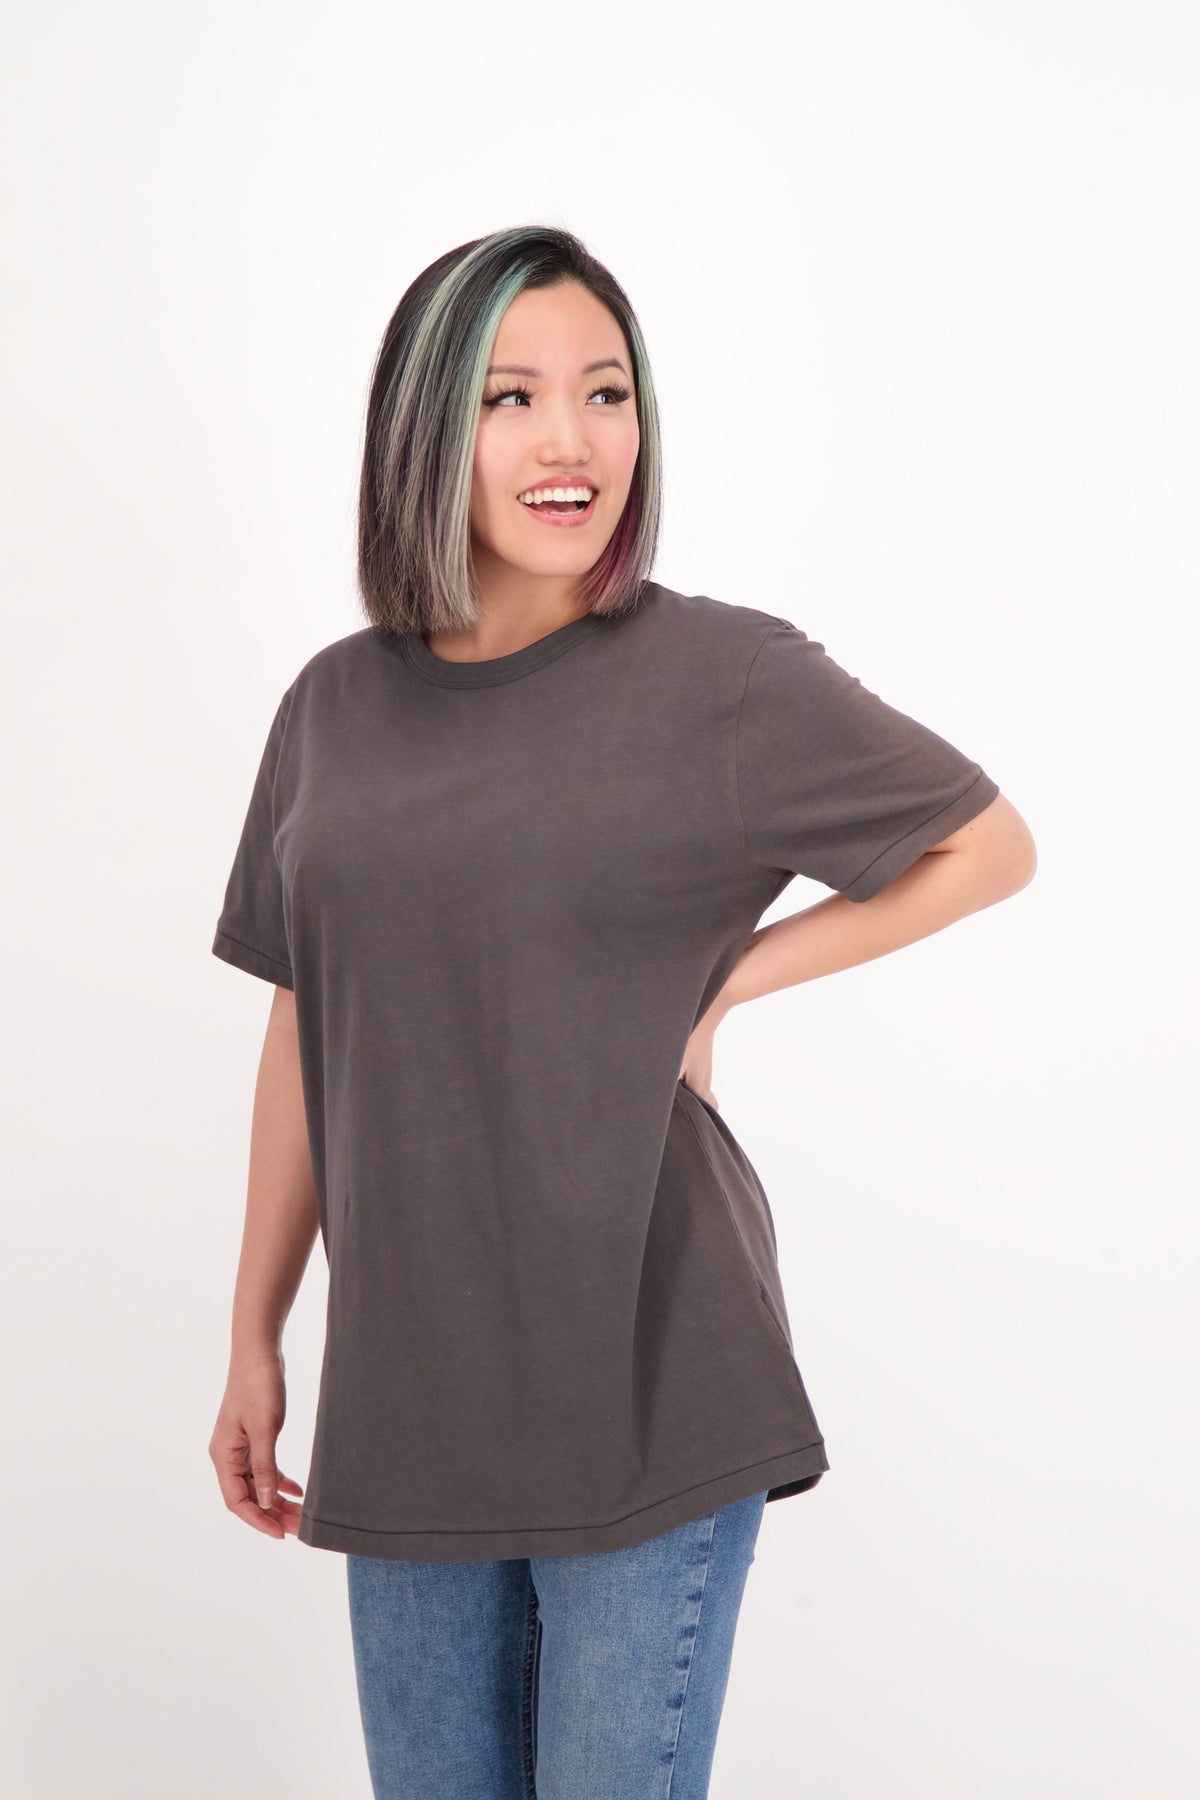 The Fave and Fair Unisex Tee - Olive/Black/White/Sky Blue/Charcoal